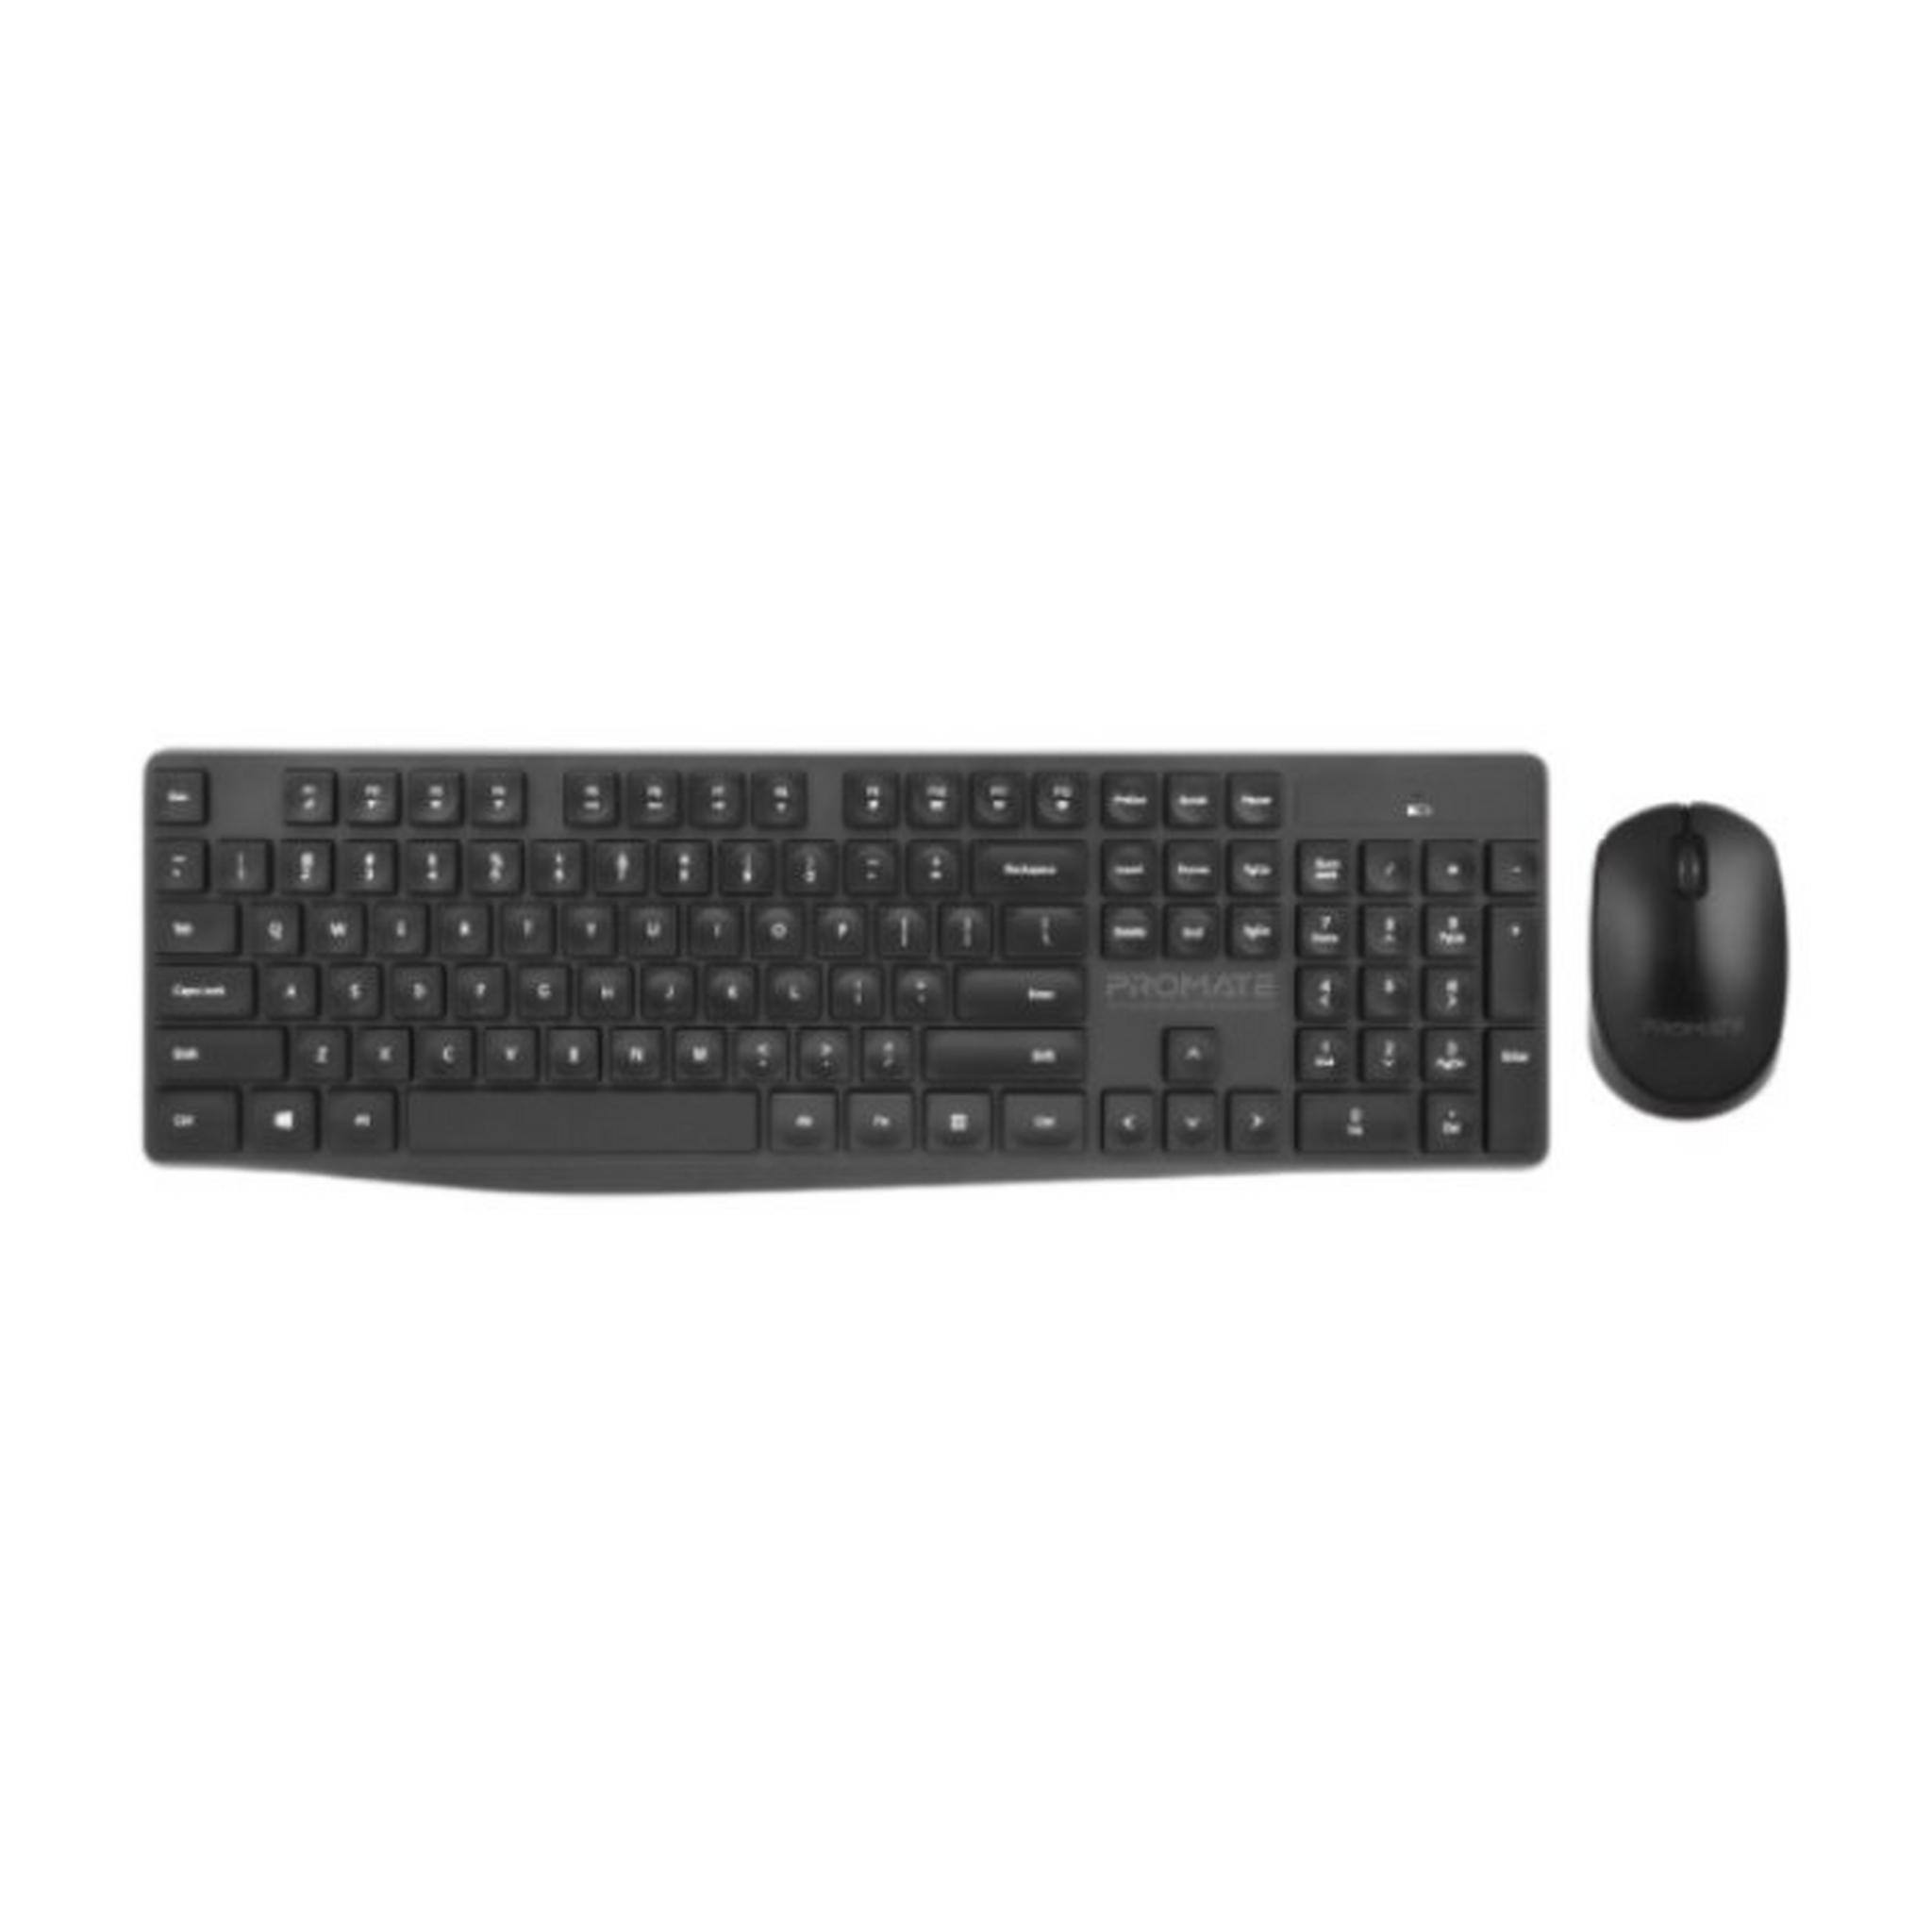 Promate Wireless Mouse and Keyboard Combo - Black (PROCOMBO-5.BLK/AE)